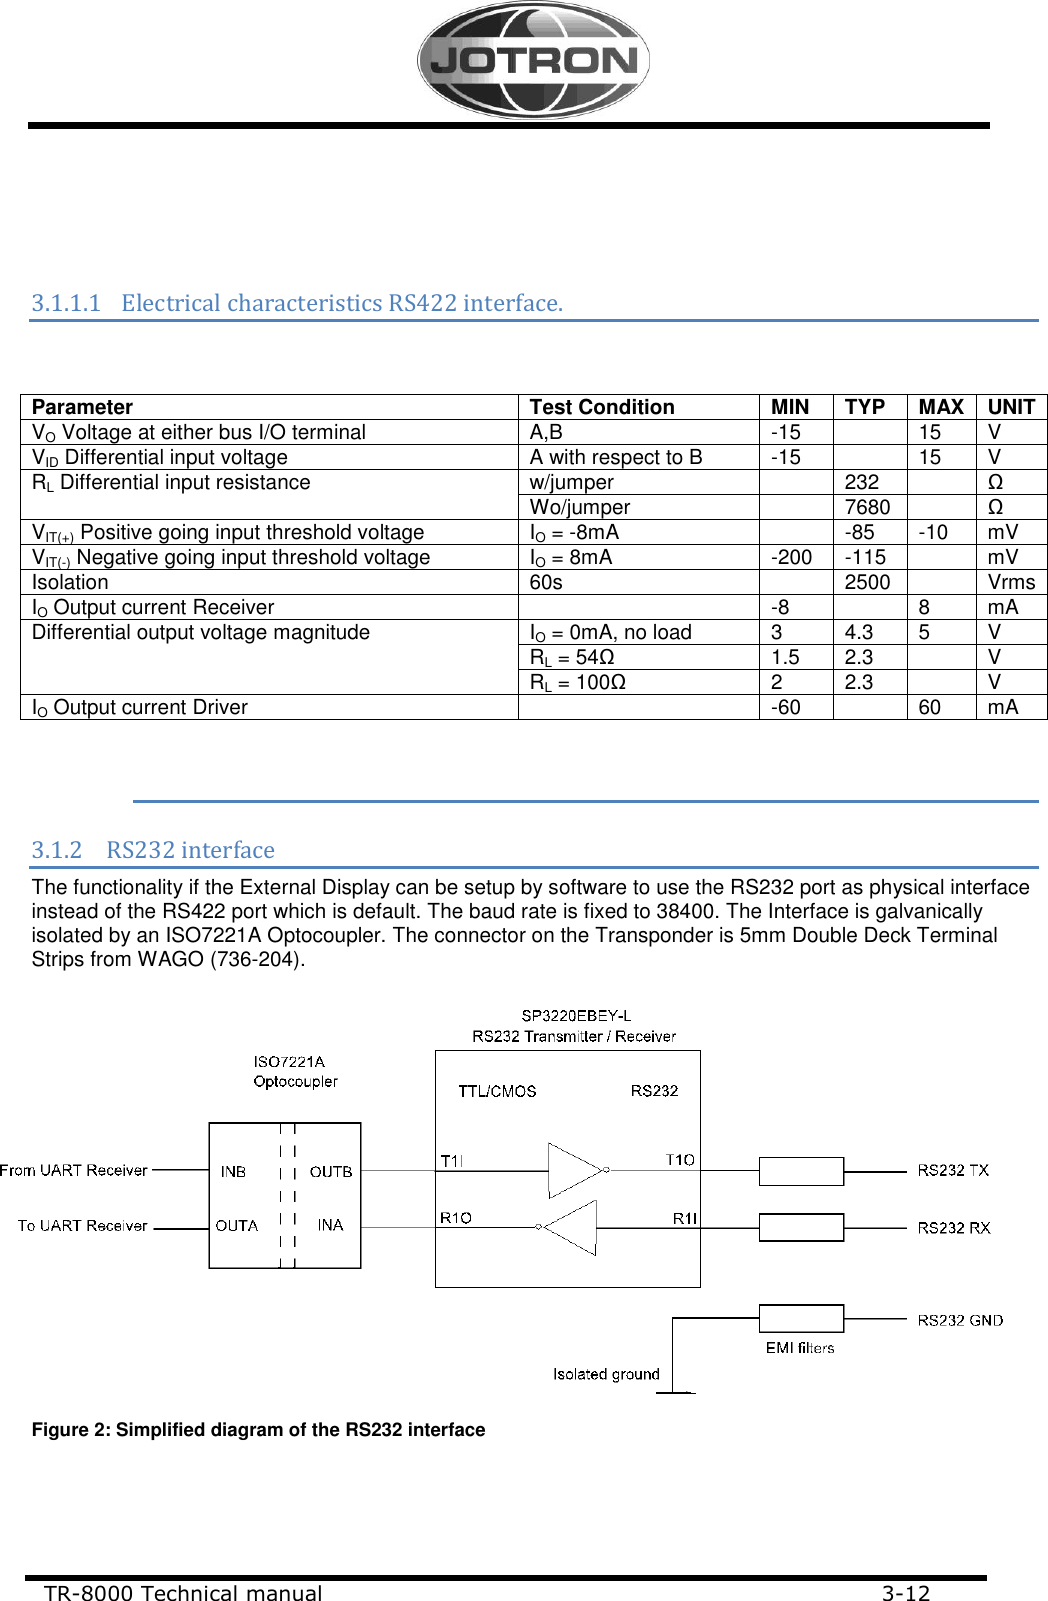     TR-8000 Technical manual                             3-12                                              3.1.1.1 Electrical characteristics RS422 interface.    Parameter Test Condition MIN TYP MAX UNIT VO Voltage at either bus I/O terminal A,B -15  15 V VID Differential input voltage A with respect to B -15  15 V RL Differential input resistance  w/jumper  232  Ω Wo/jumper  7680  Ω VIT(+) Positive going input threshold voltage IO = -8mA  -85 -10 mV VIT(-) Negative going input threshold voltage IO = 8mA -200 -115  mV Isolation 60s  2500  Vrms IO Output current Receiver  -8  8 mA Differential output voltage magnitude IO = 0mA, no load 3 4.3 5 V RL = 54Ω 1.5 2.3  V RL = 100Ω 2 2.3  V IO Output current Driver  -60  60 mA   3.1.2 RS232 interface The functionality if the External Display can be setup by software to use the RS232 port as physical interface instead of the RS422 port which is default. The baud rate is fixed to 38400. The Interface is galvanically isolated by an ISO7221A Optocoupler. The connector on the Transponder is 5mm Double Deck Terminal Strips from WAGO (736-204).               Figure 2: Simplified diagram of the RS232 interface    